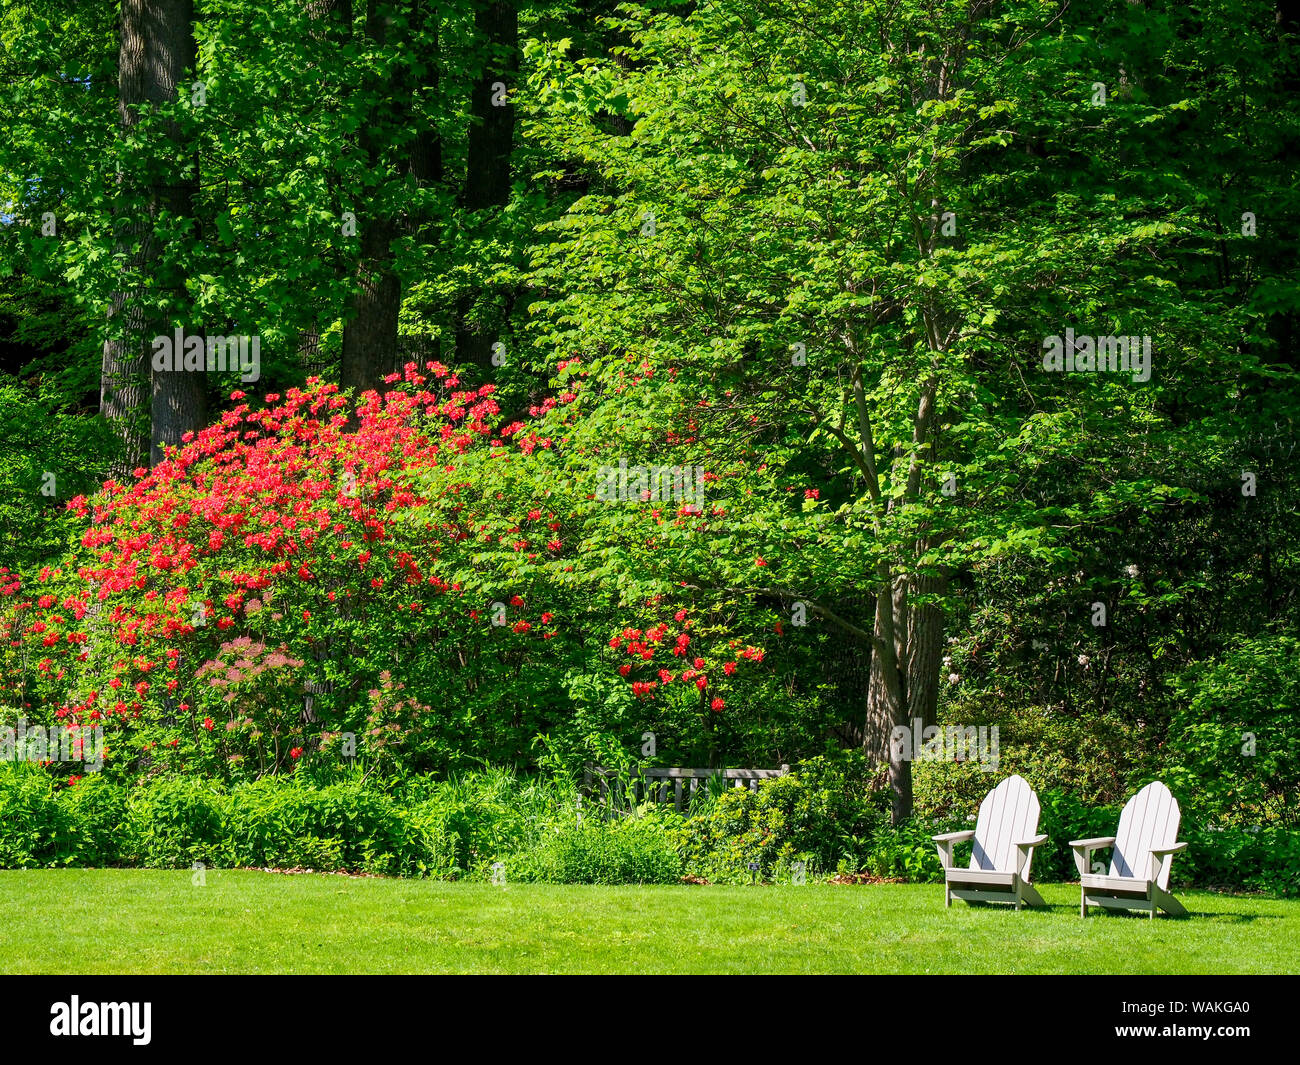 USA, Pennsylvania. Two chairs and flowering shrub in a park. Stock Photo